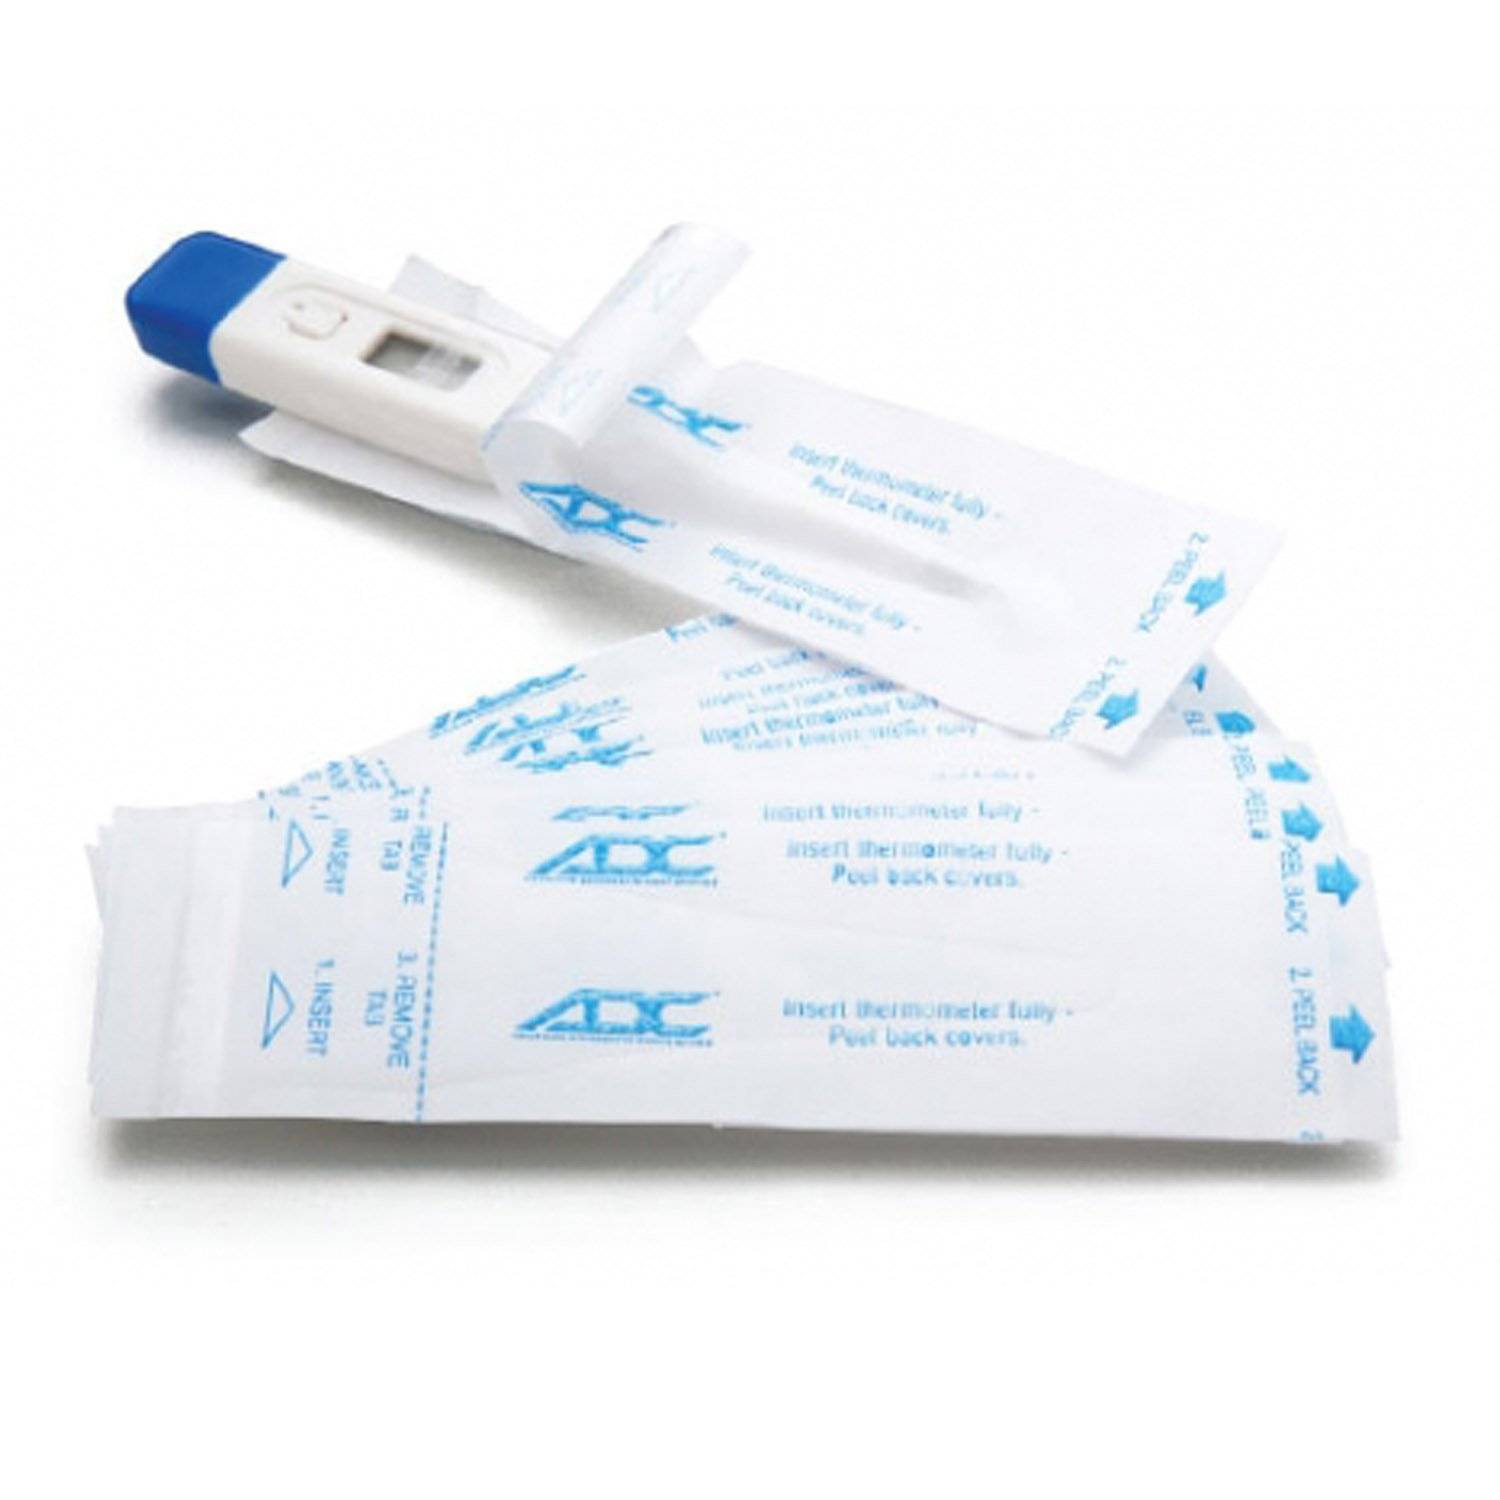 ADC Digital Thermometer Covers